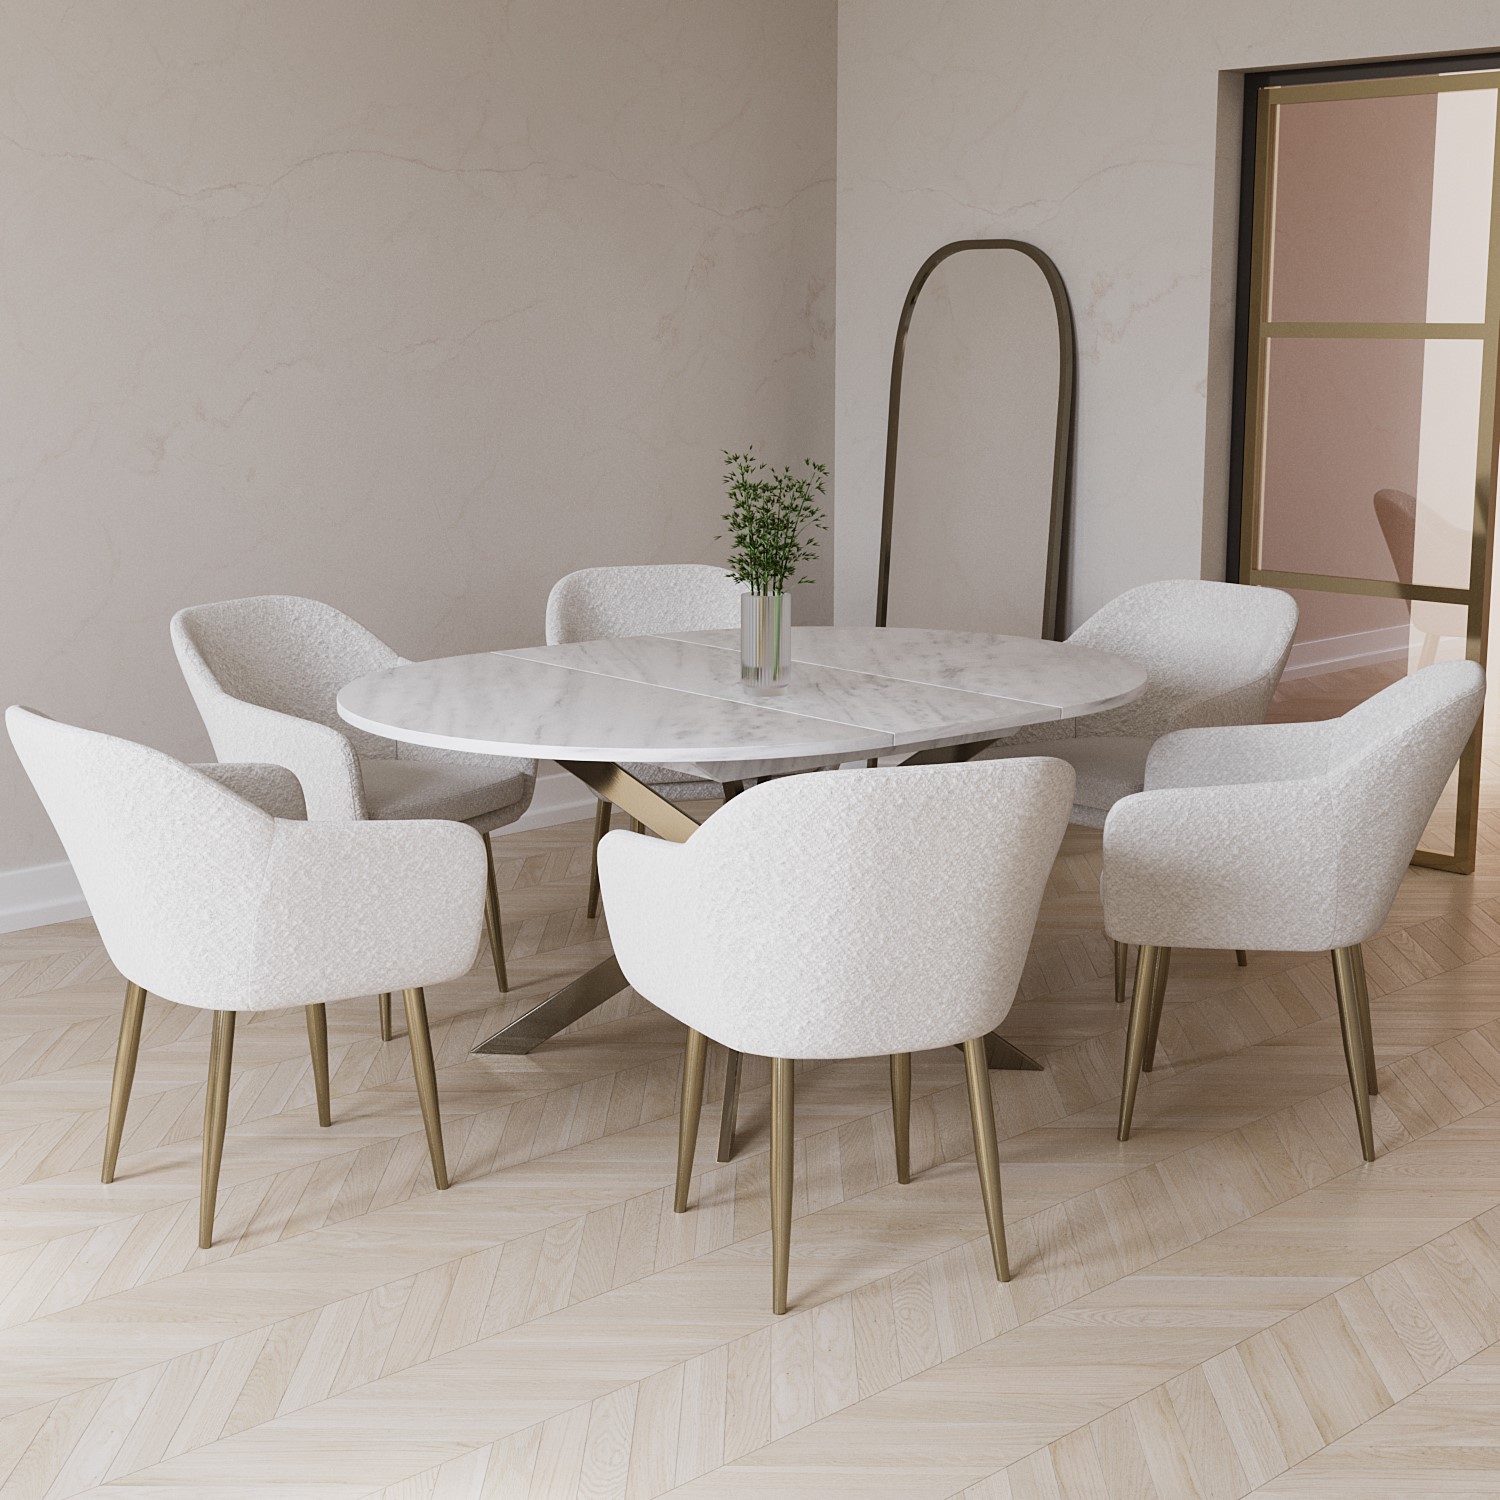 White Oval Dining Table with Brass Feet - Transitional - Dining Room